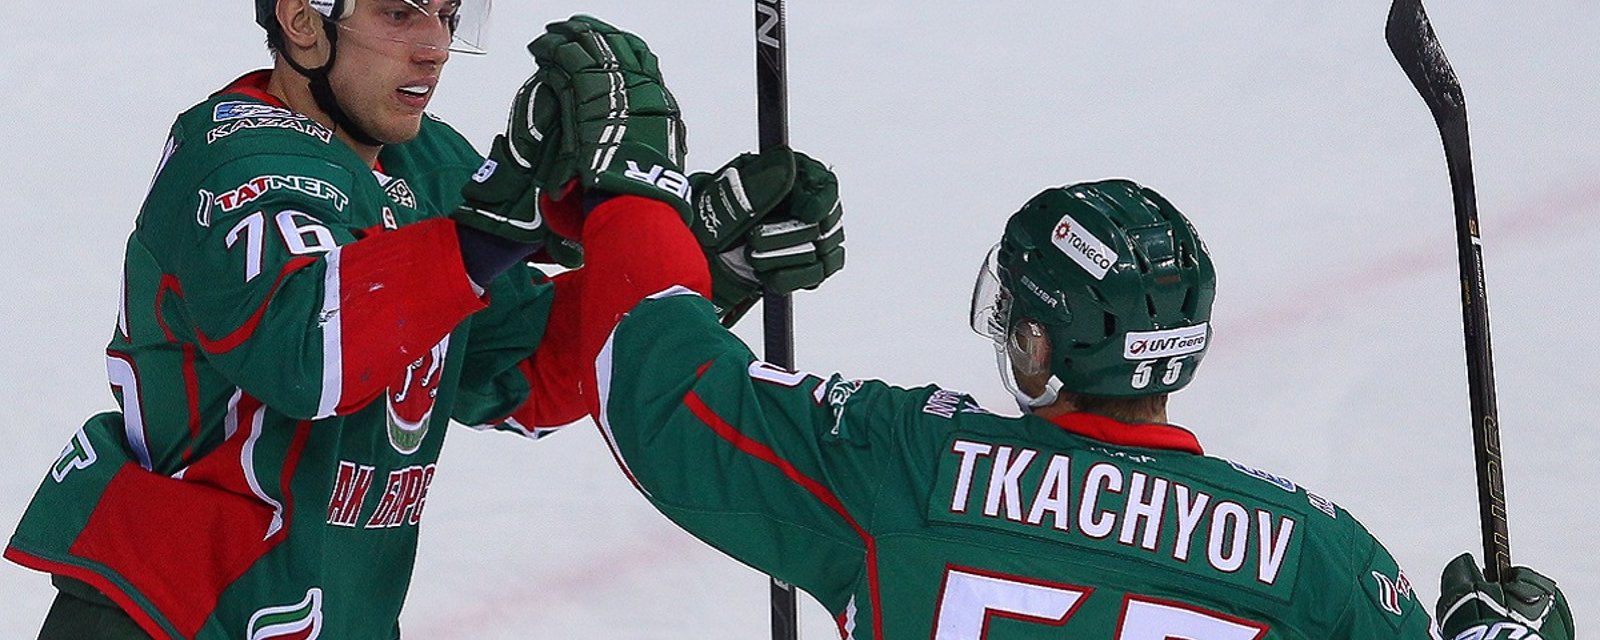 Leafs reportedly interested in acquiring KHL forward.